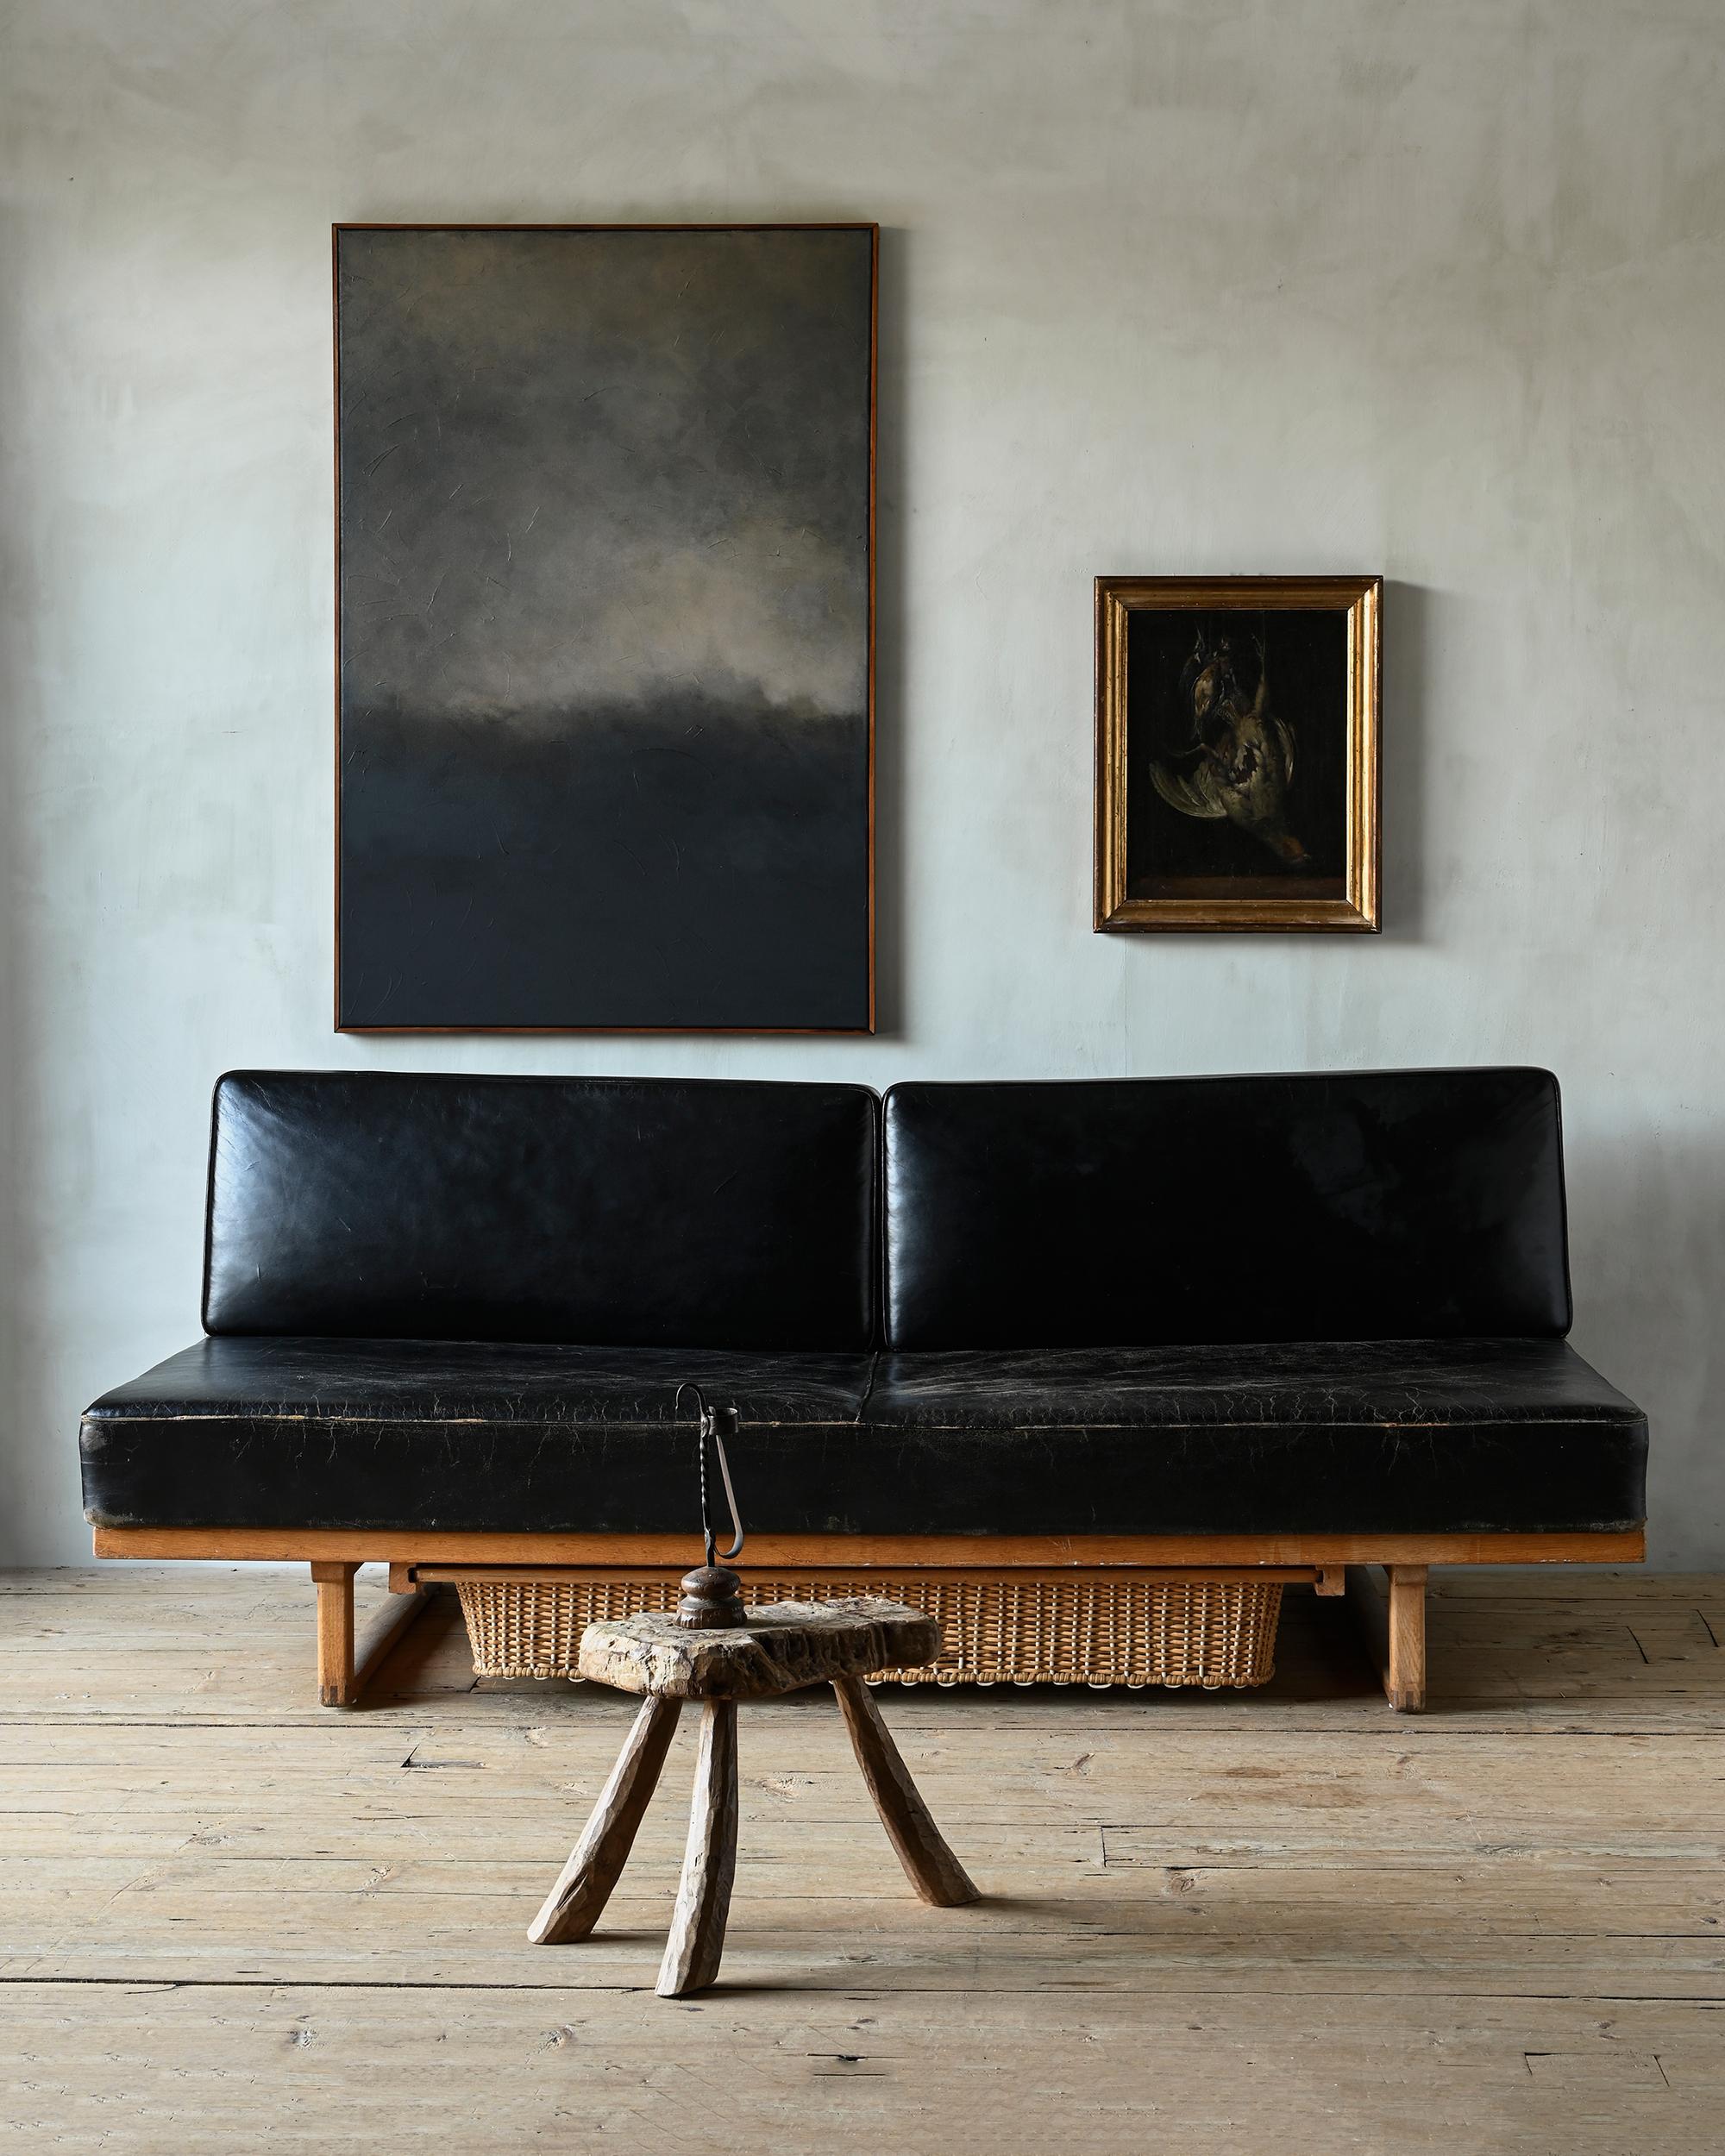 Børge Mogensen sofa / daybed model 4311/4312. Produced by Fredericia Möbelfabrik in Denmark. Very unusual with leather and the removable basket. circa 1950-1960s.